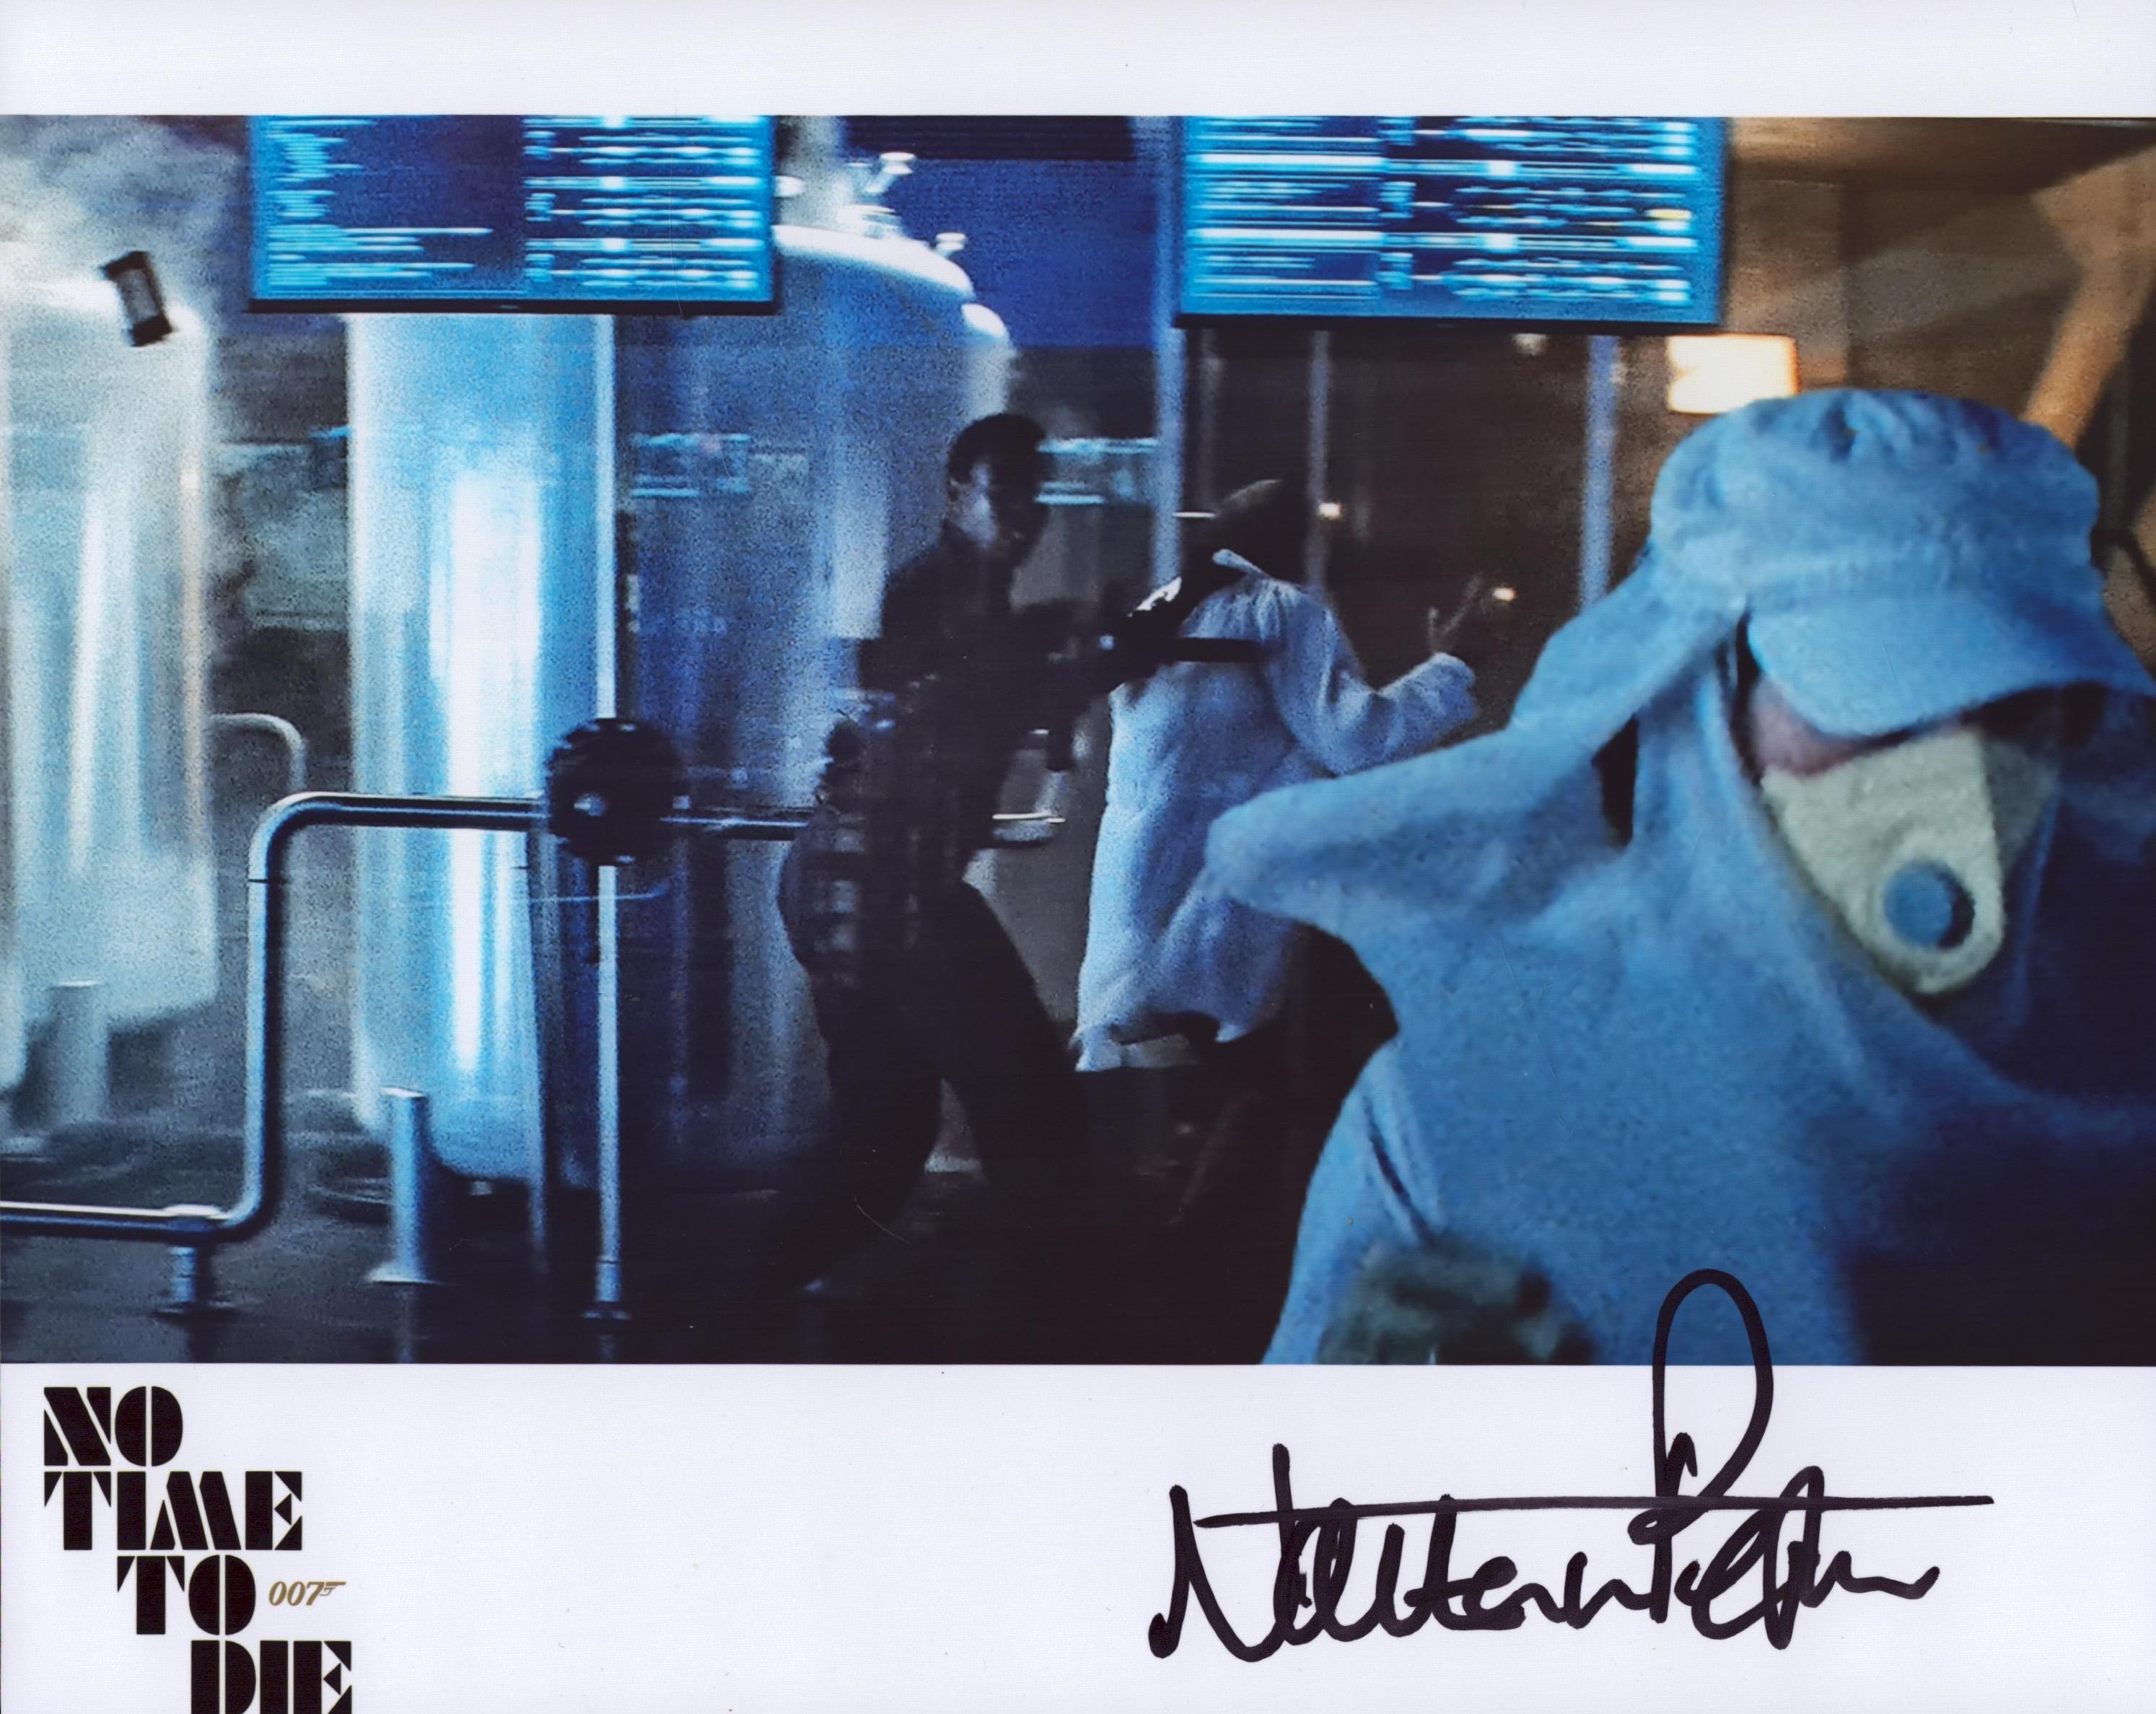 James Bond actor Nathan James Pegler signed 10 x 8 colour photo from No time to Die, lab